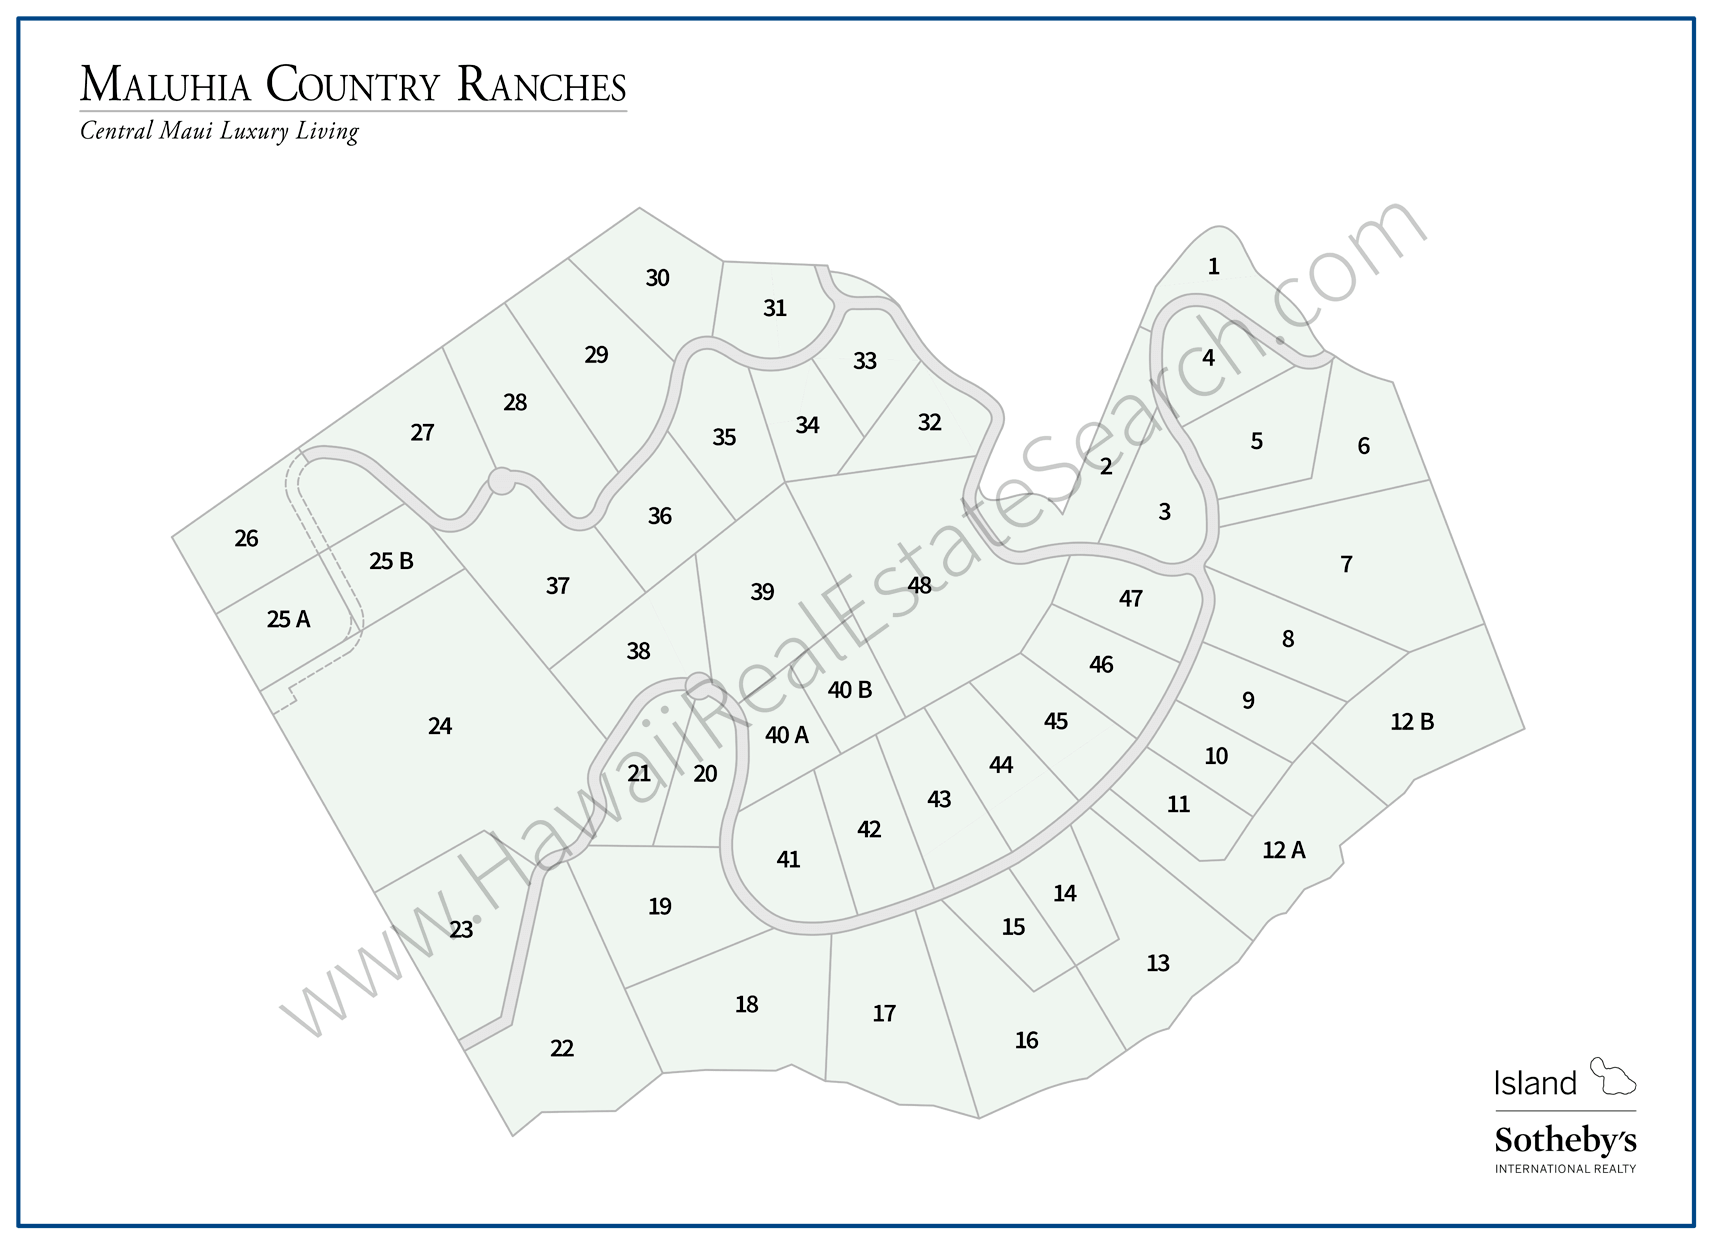 Maluhia Country Ranches Map